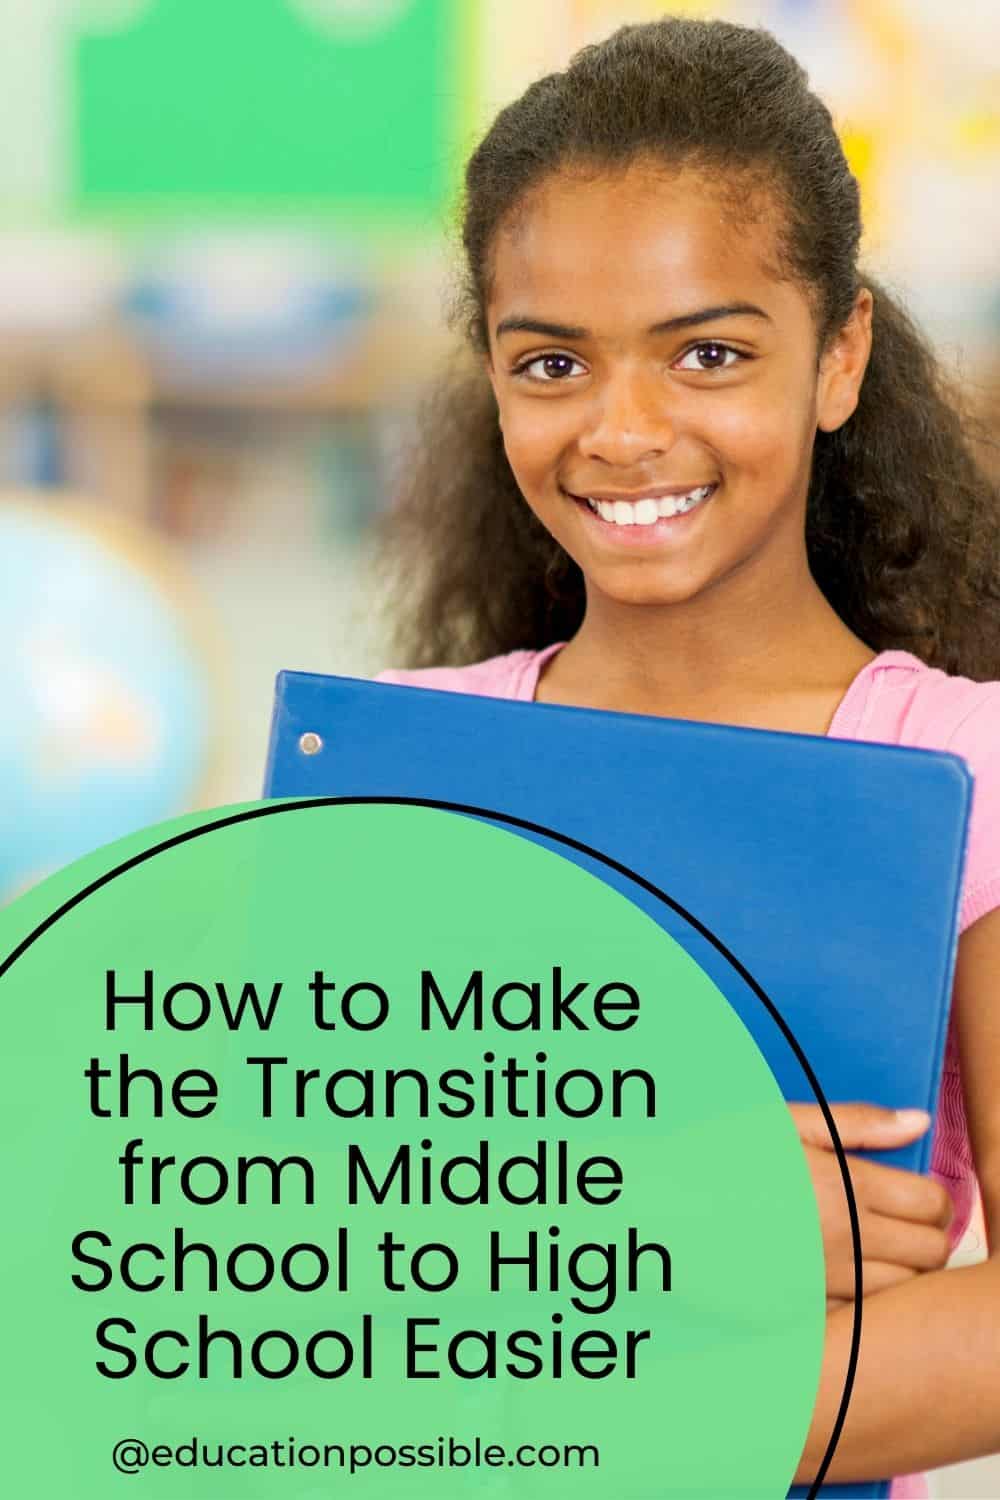 Ideas for Making the Transition from Middle School to High School